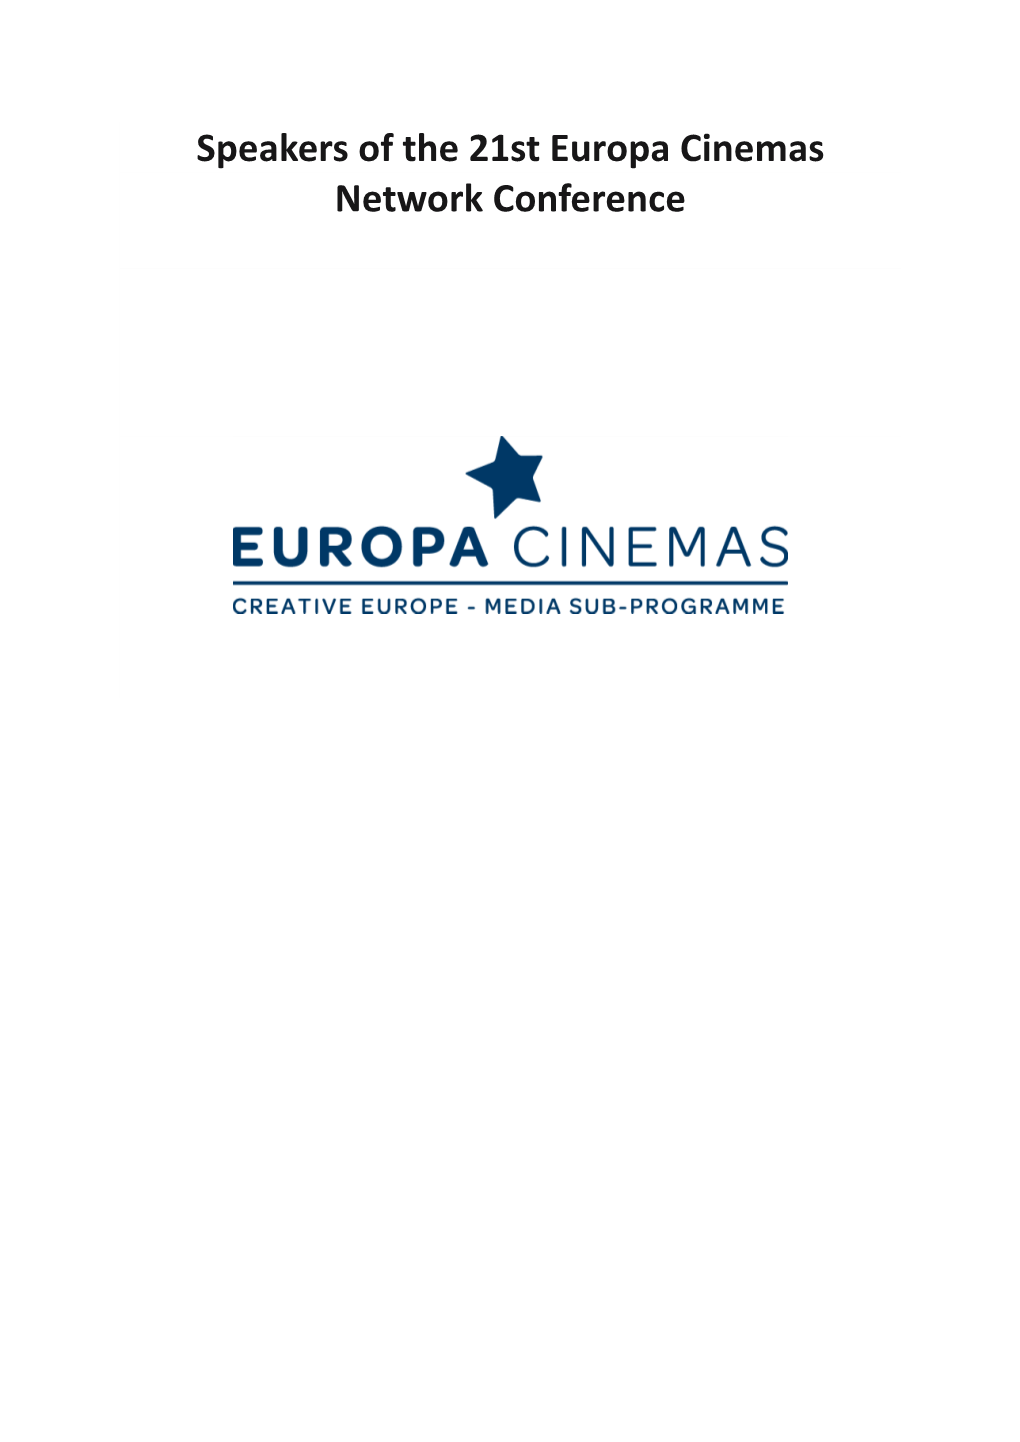 Speakers of the 21St Europa Cinemas Network Conference